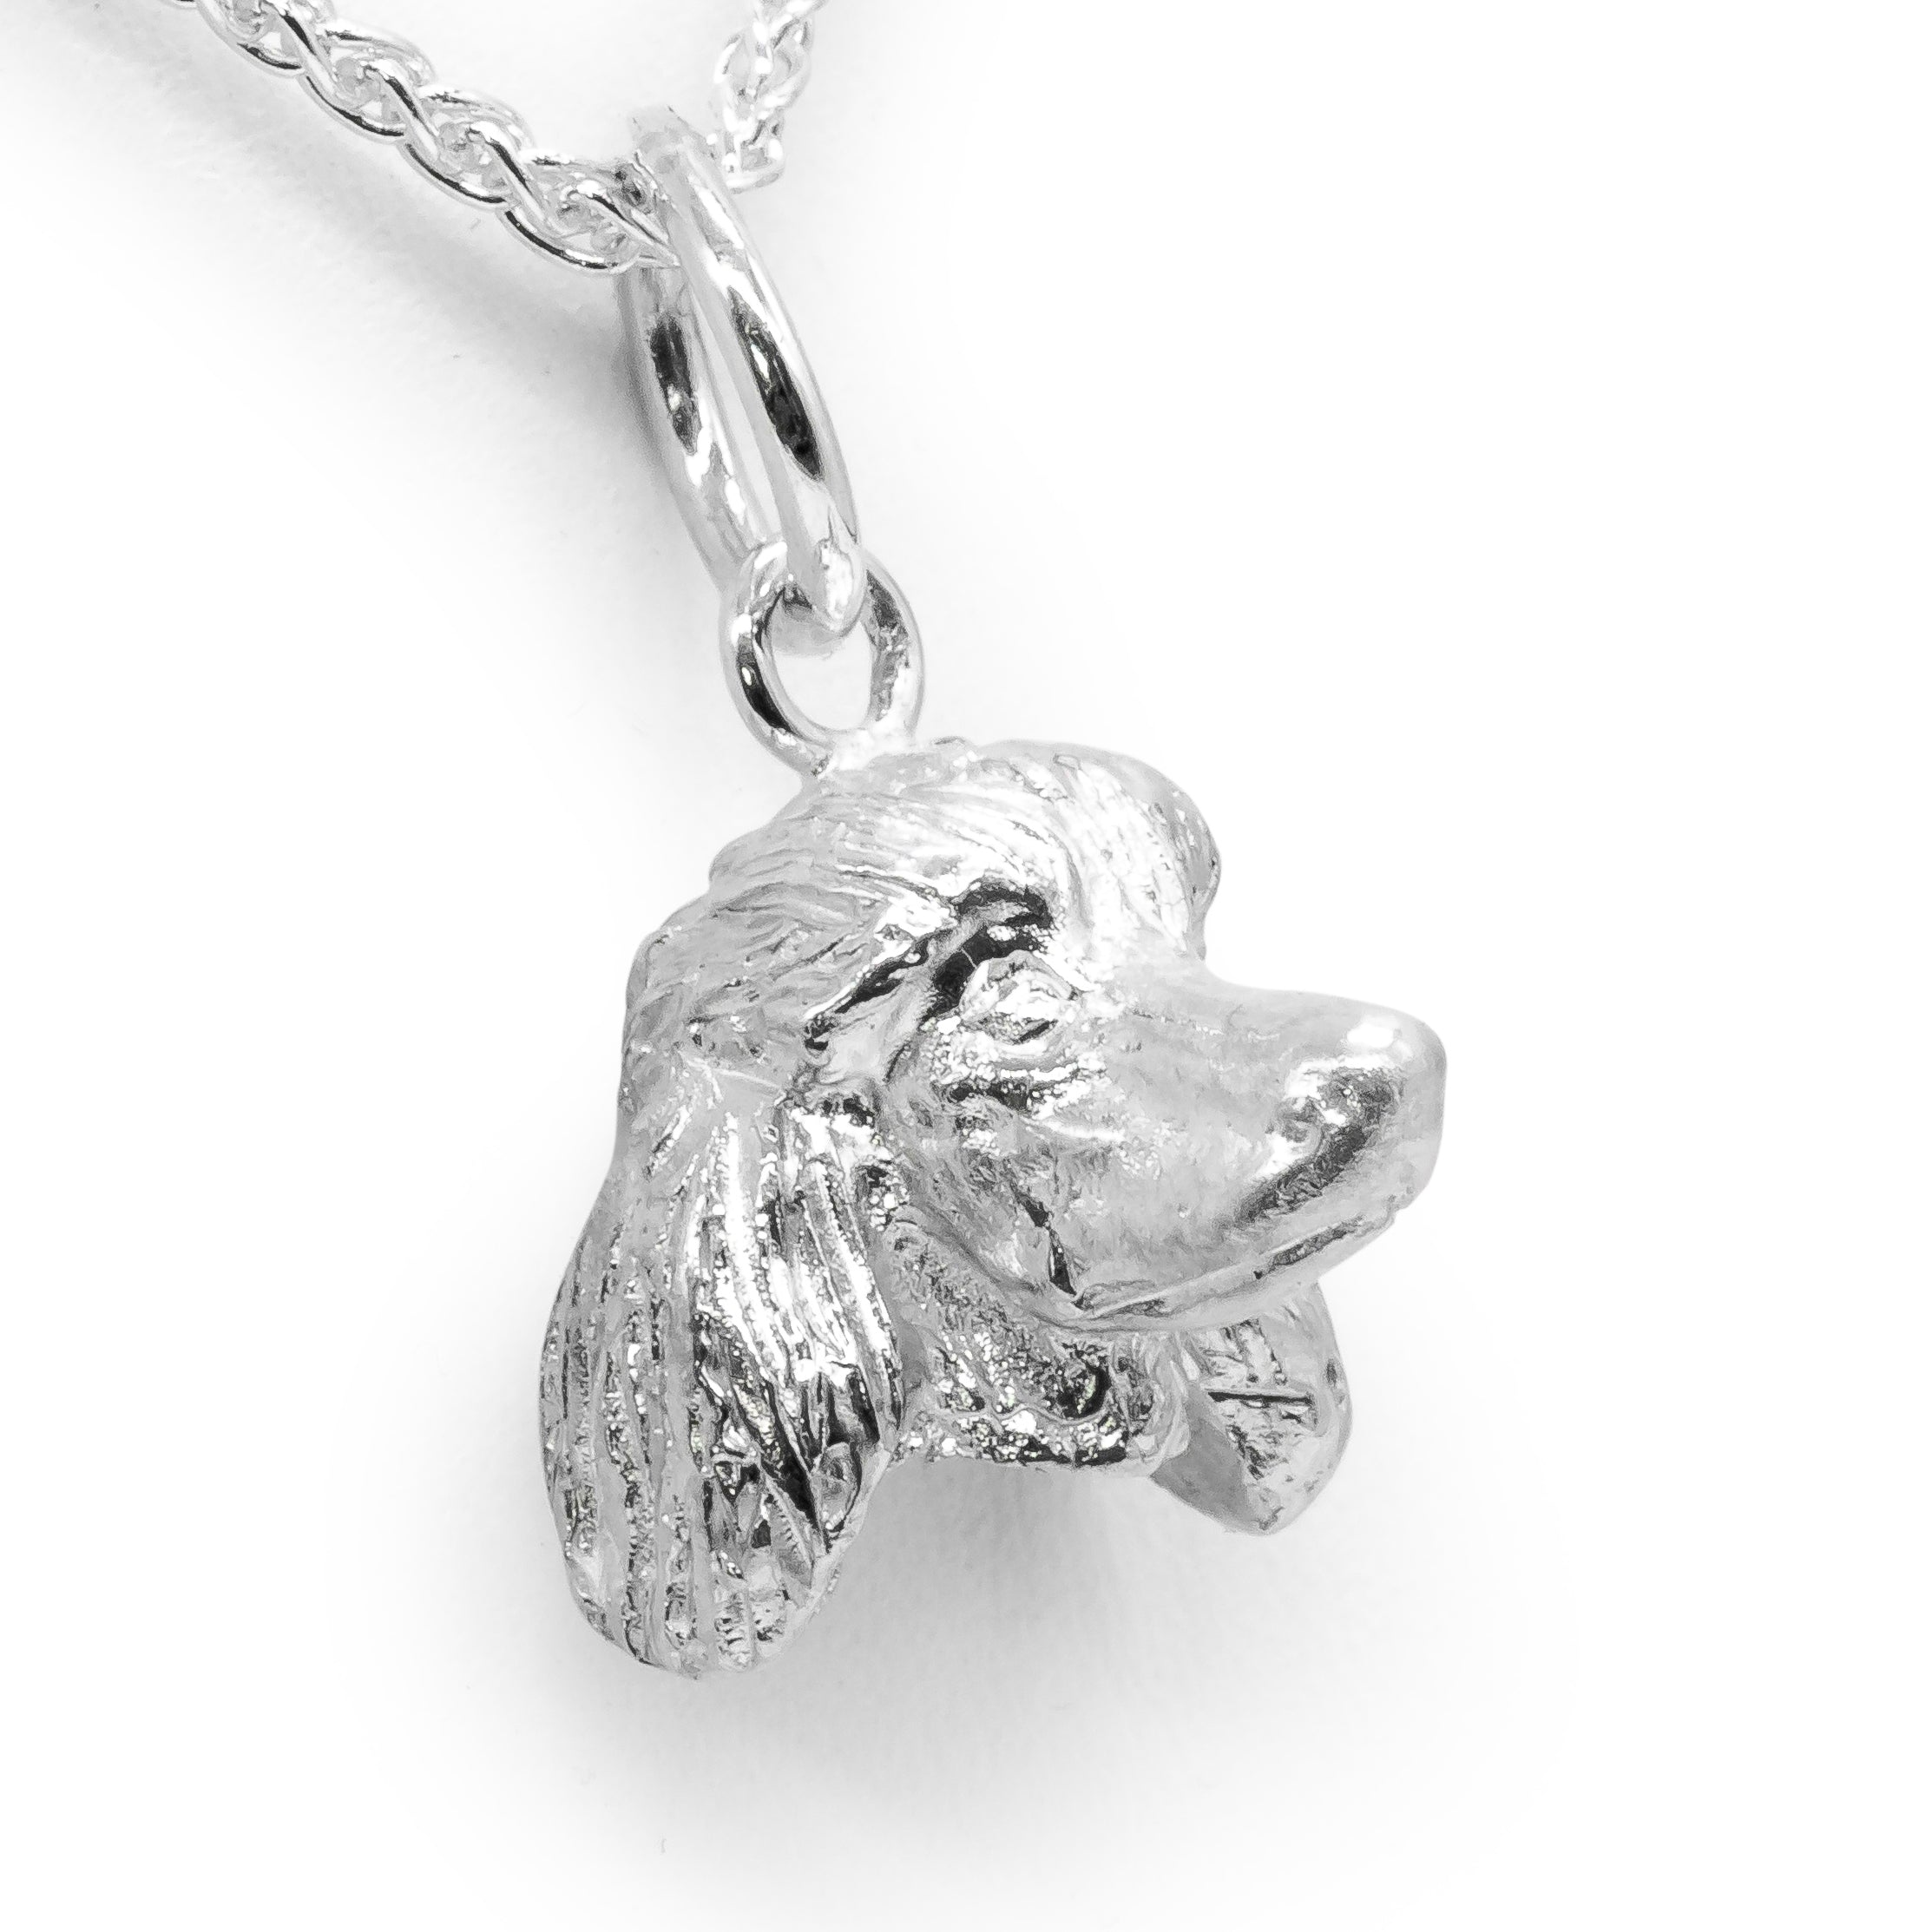 Poodle Charm or Pendant by Paul Eaton